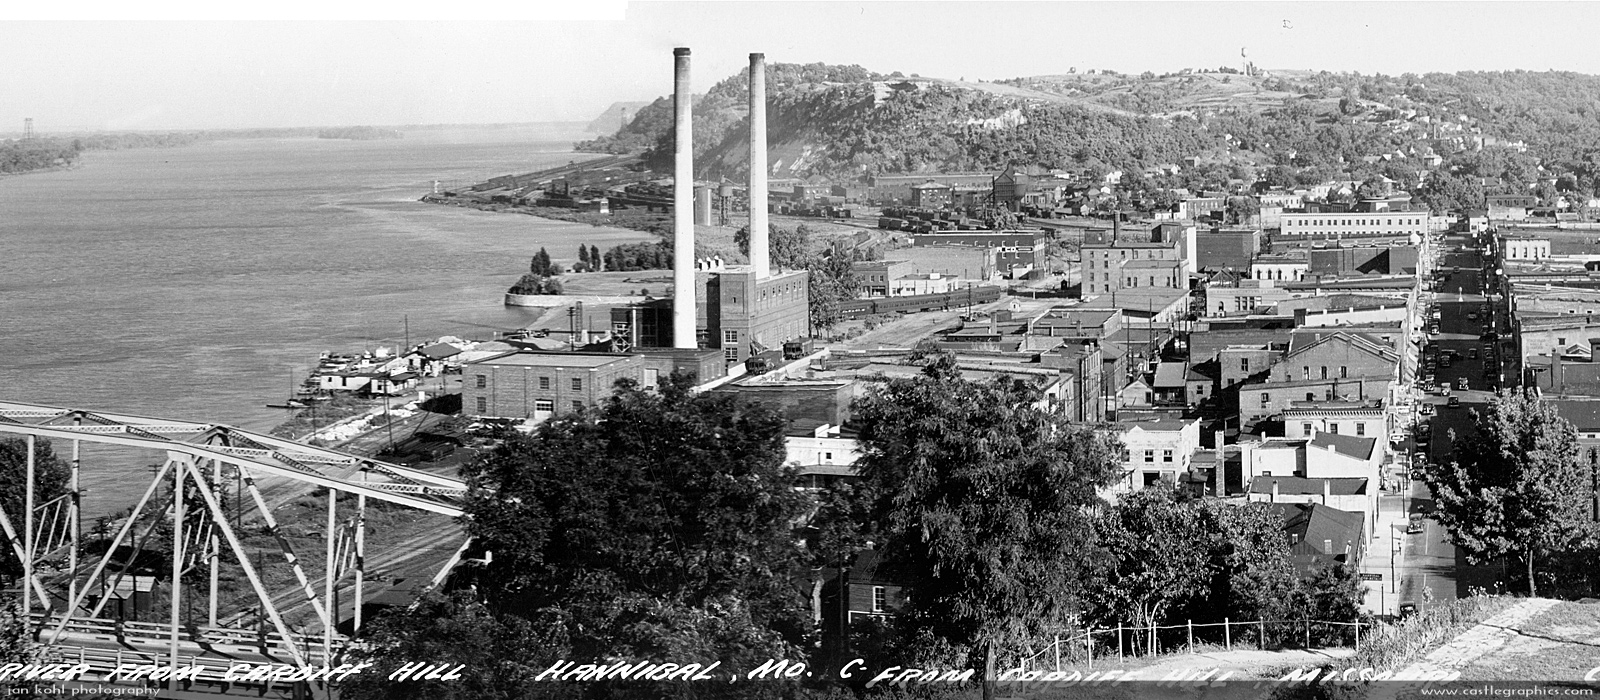 Hannibal, MO
A panoramic photo of Hannibal, Missouri, in 1939 from Cardiff Hill.
